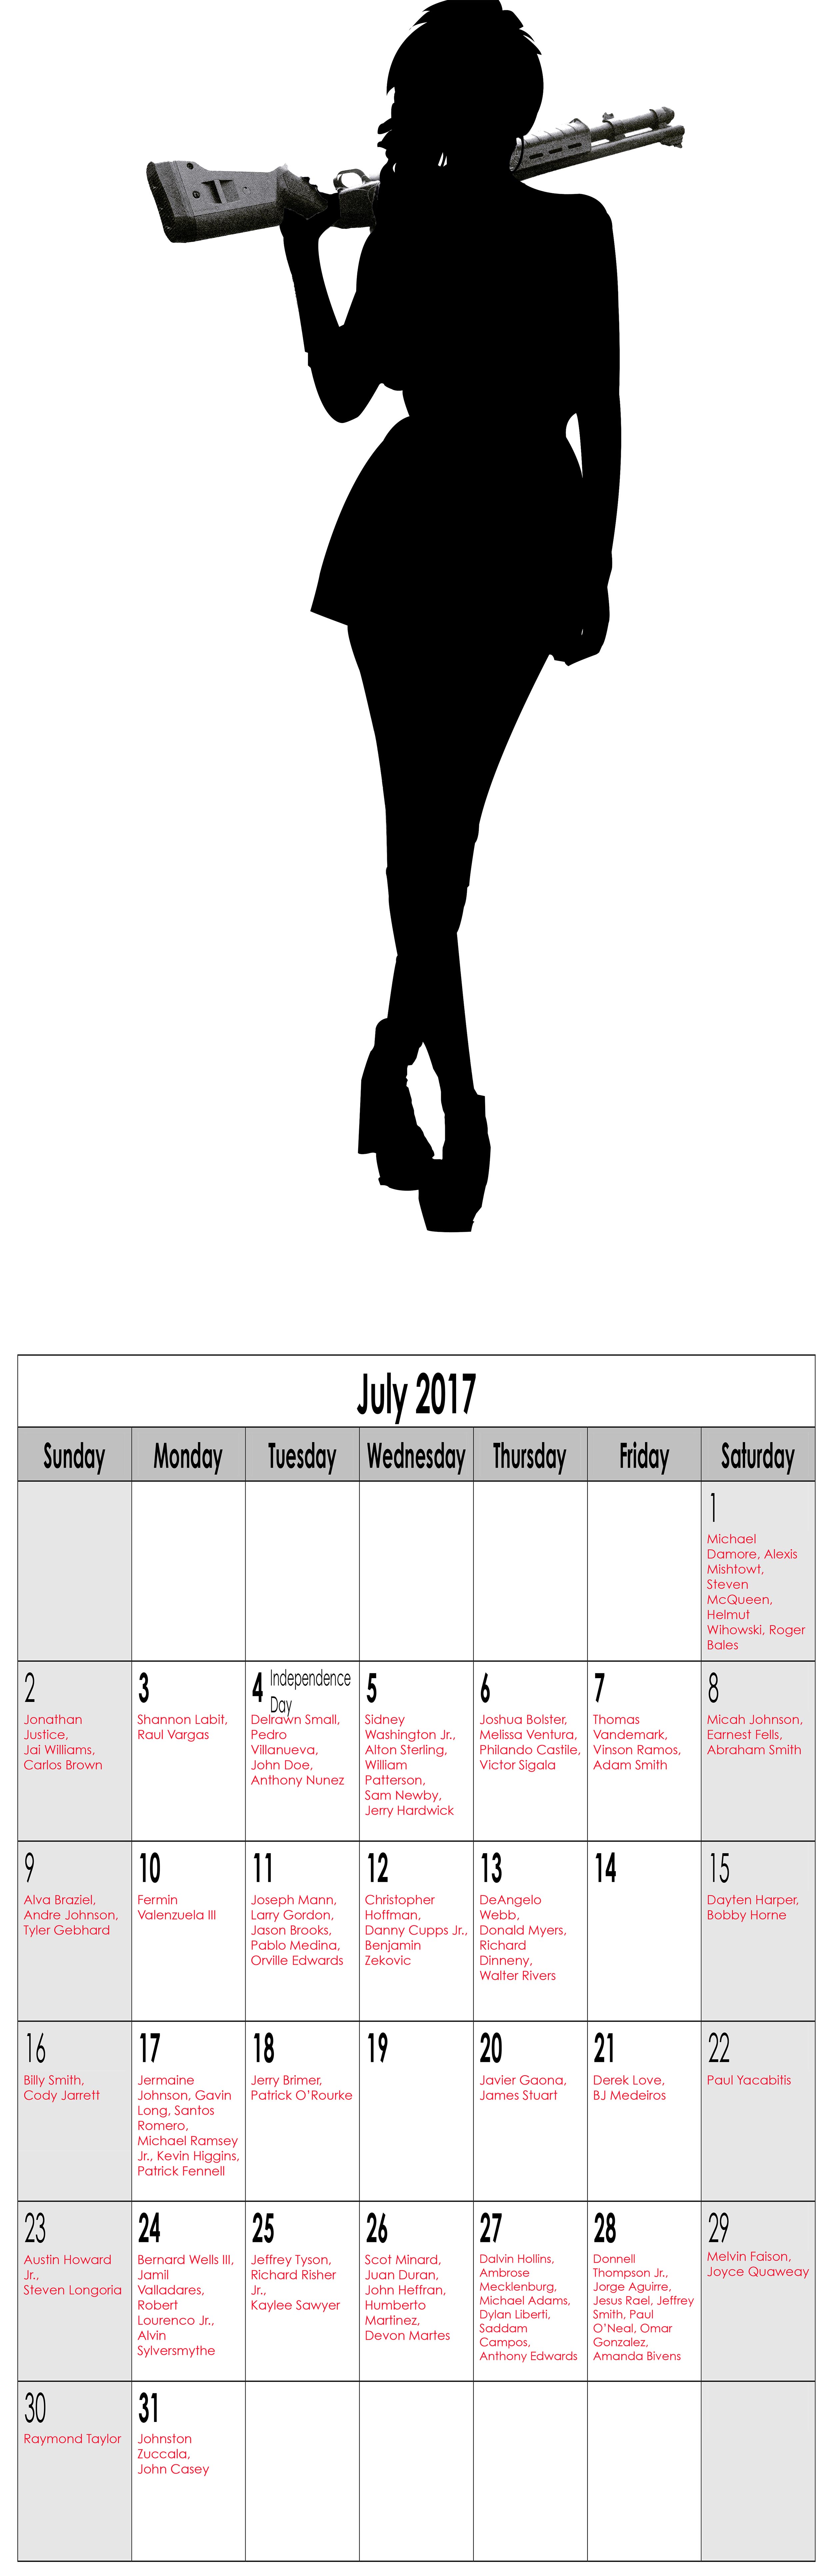 Year in Review (Miss July), 2016, Archival Pigment Print, 11"x34"